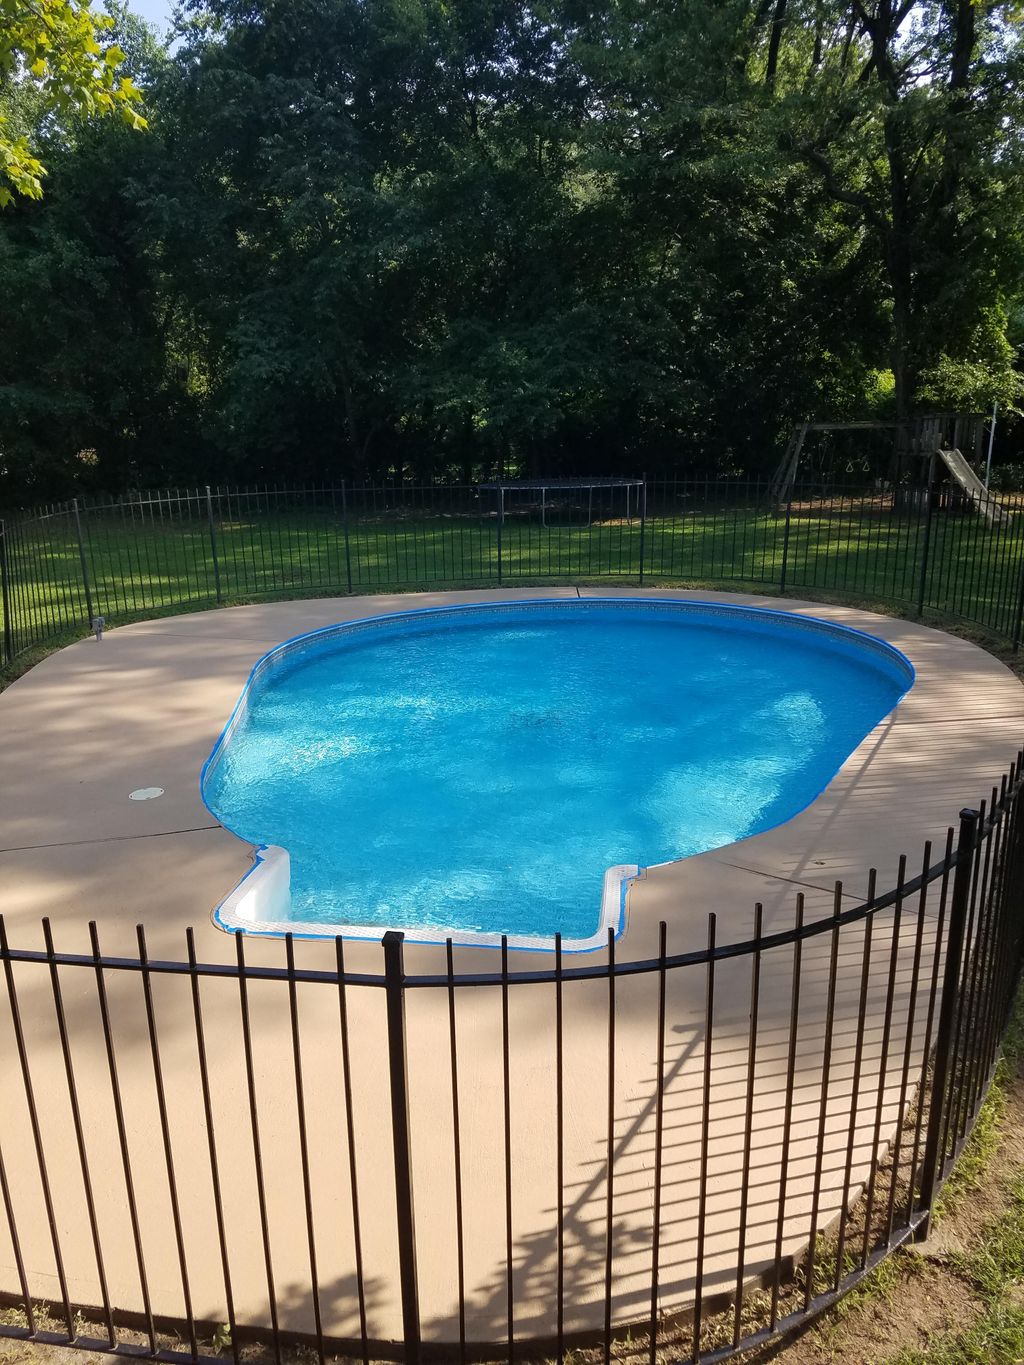 We offer repairs and renovations for your pool....